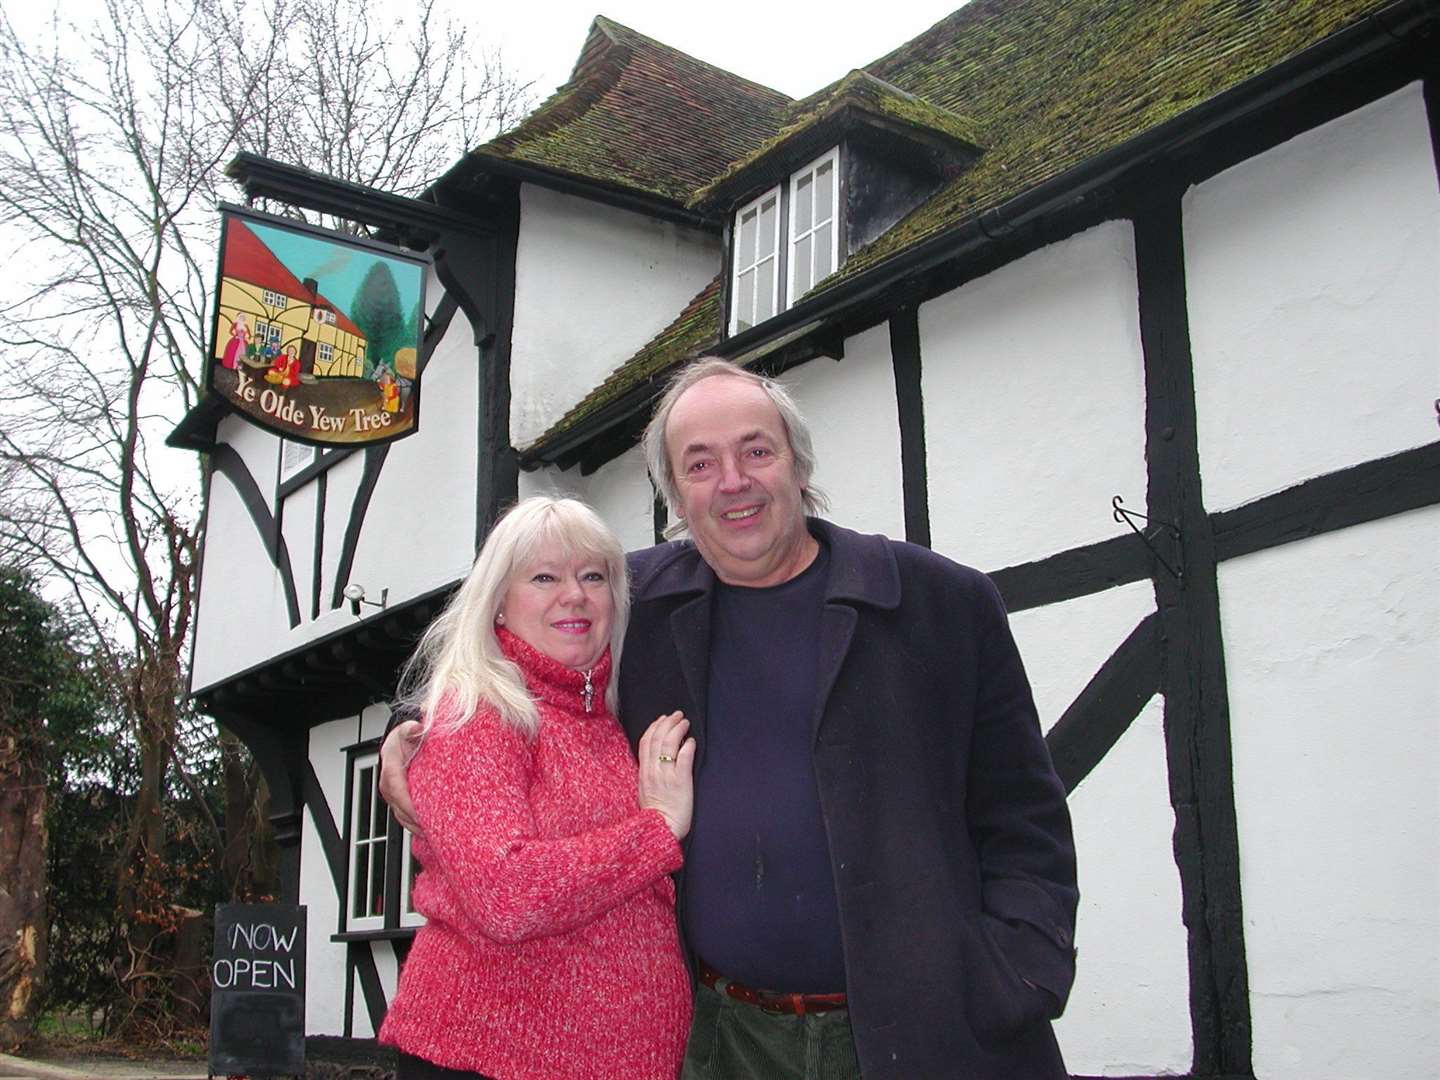 Peter Malkin and his partner, Kate, outside the Yew Tree